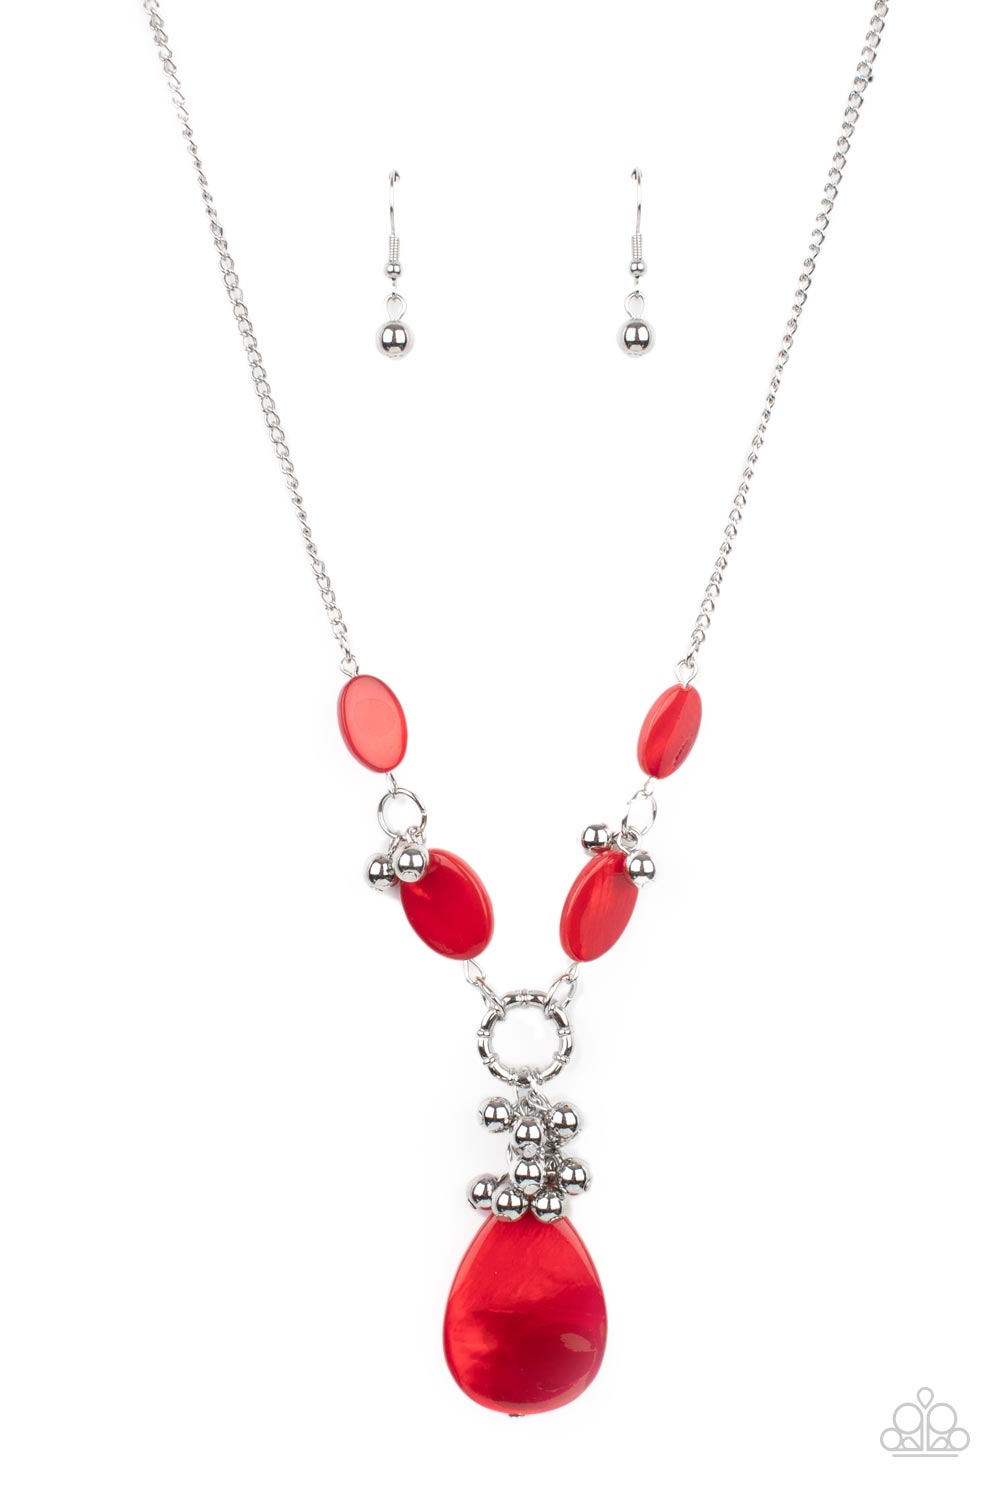 Paparazzi Paparazzi Accessories - Summer Idol - Red Necklace. Bling By Titia Boutique